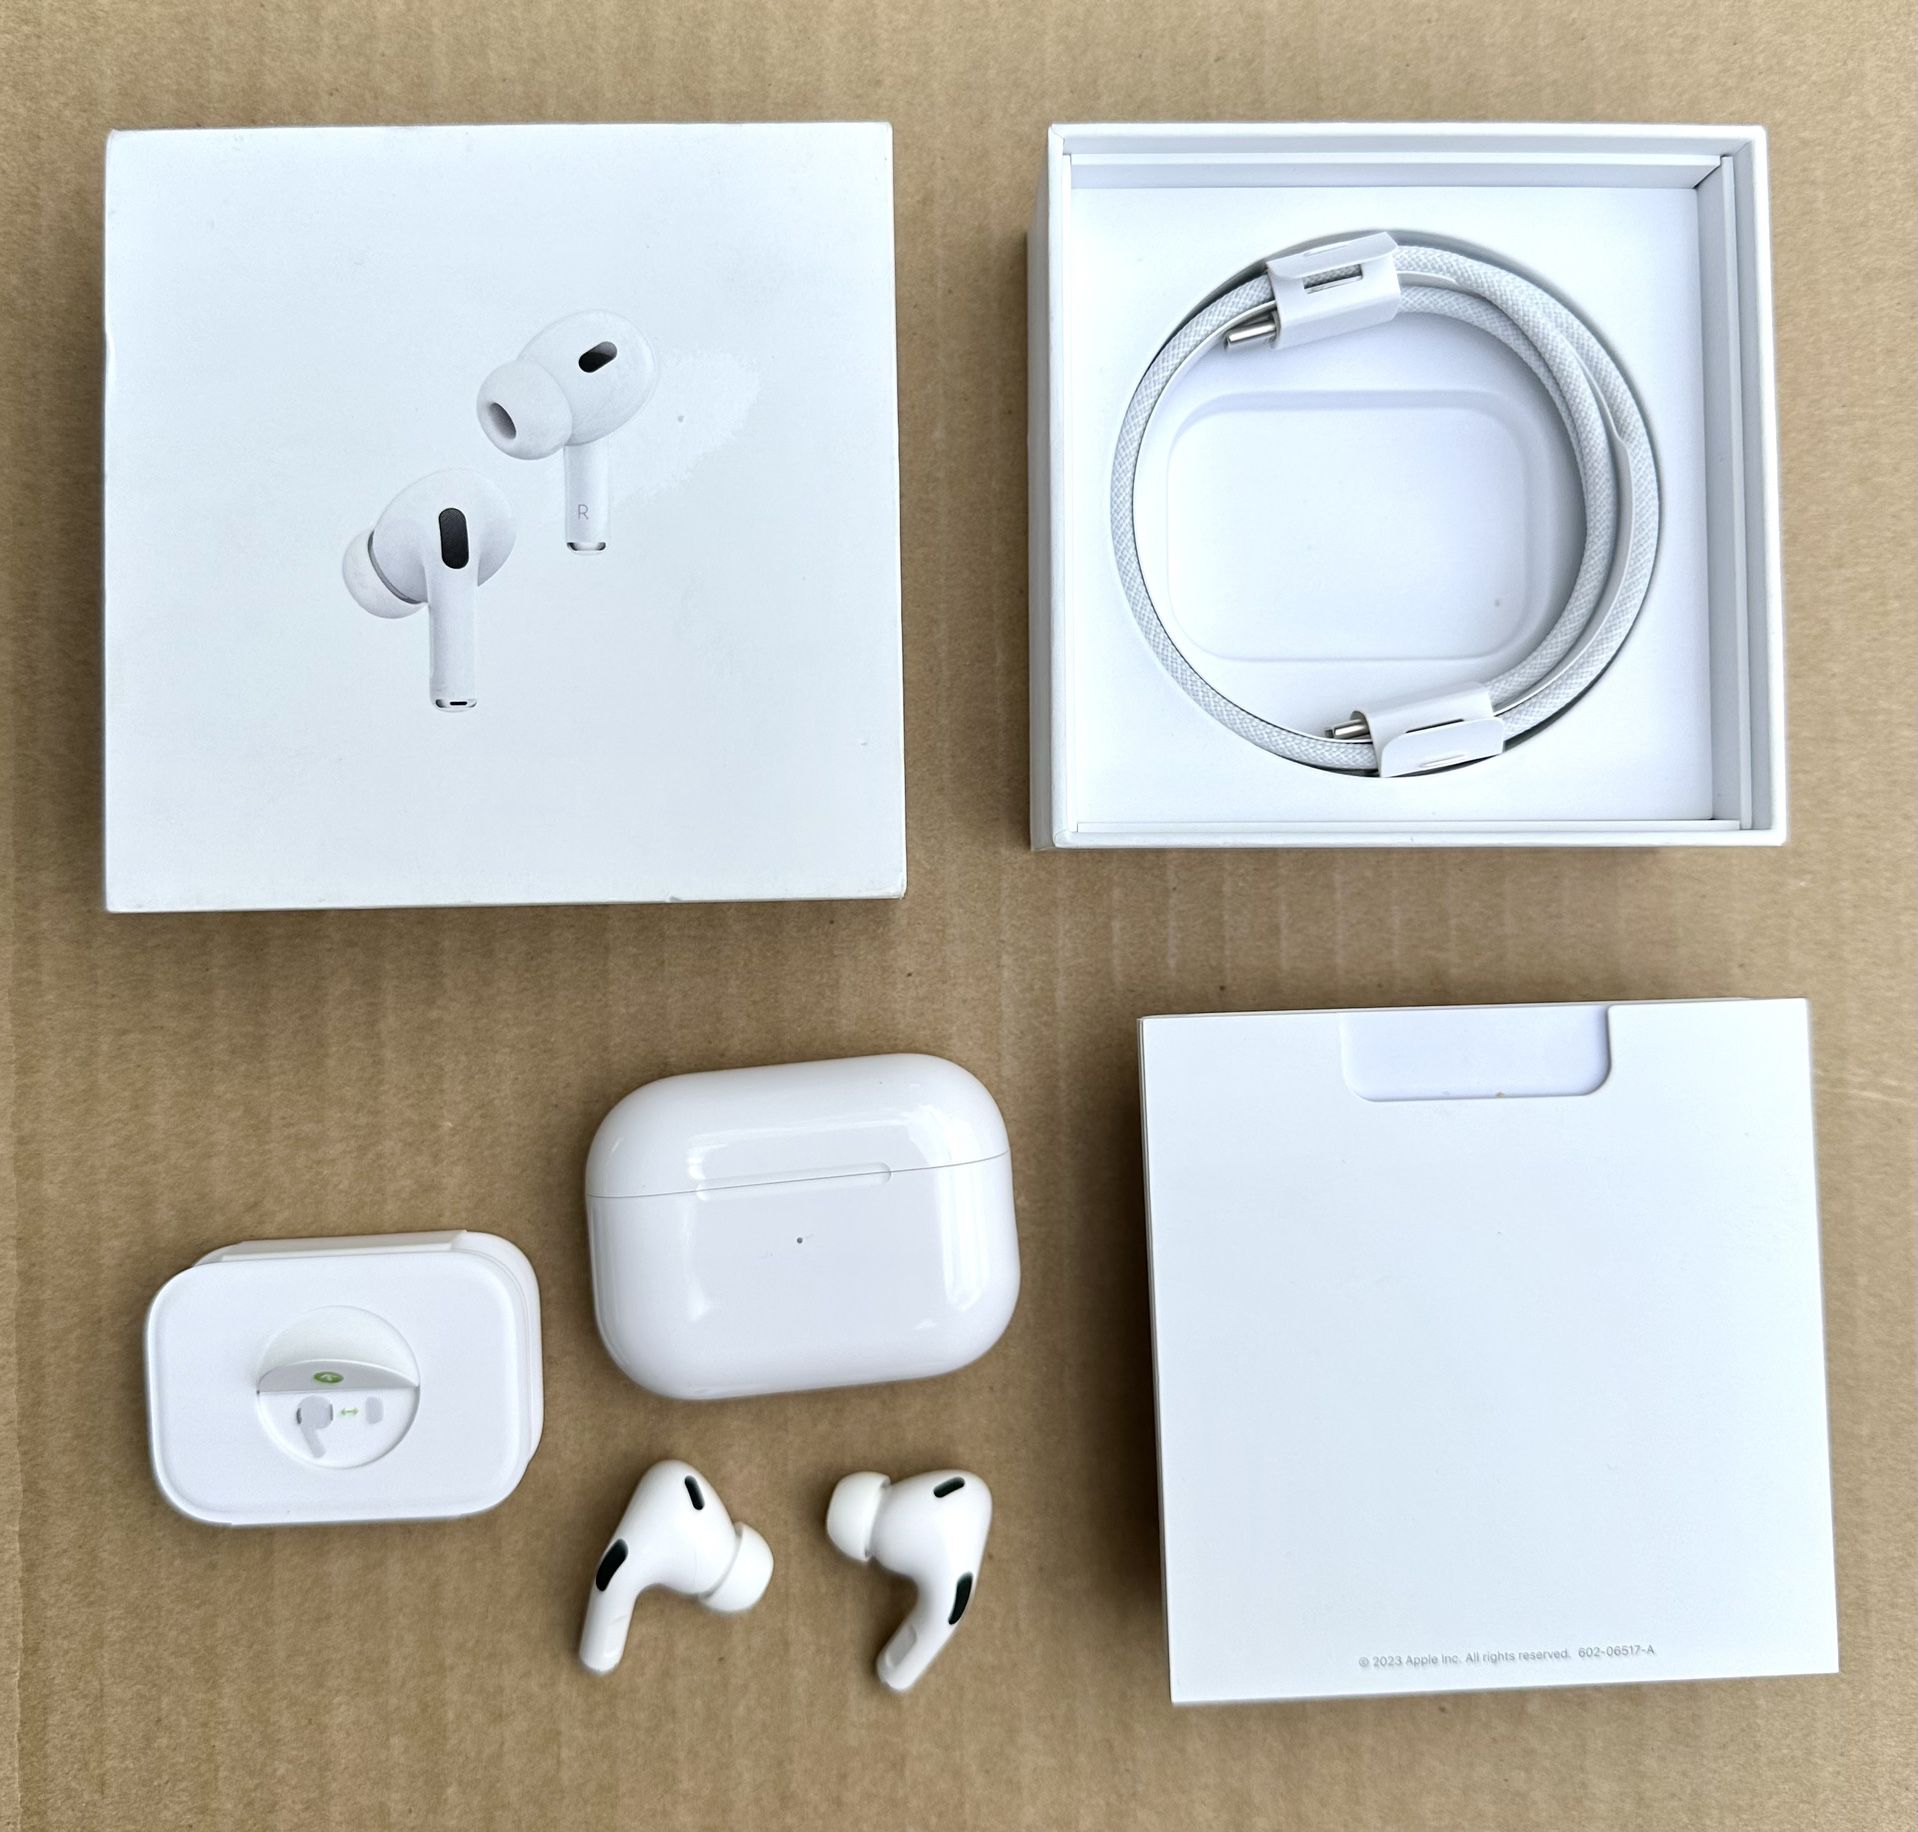 NEW In Box Apple AirPods Pro 2nd Generation with  MagSafe Charging Case